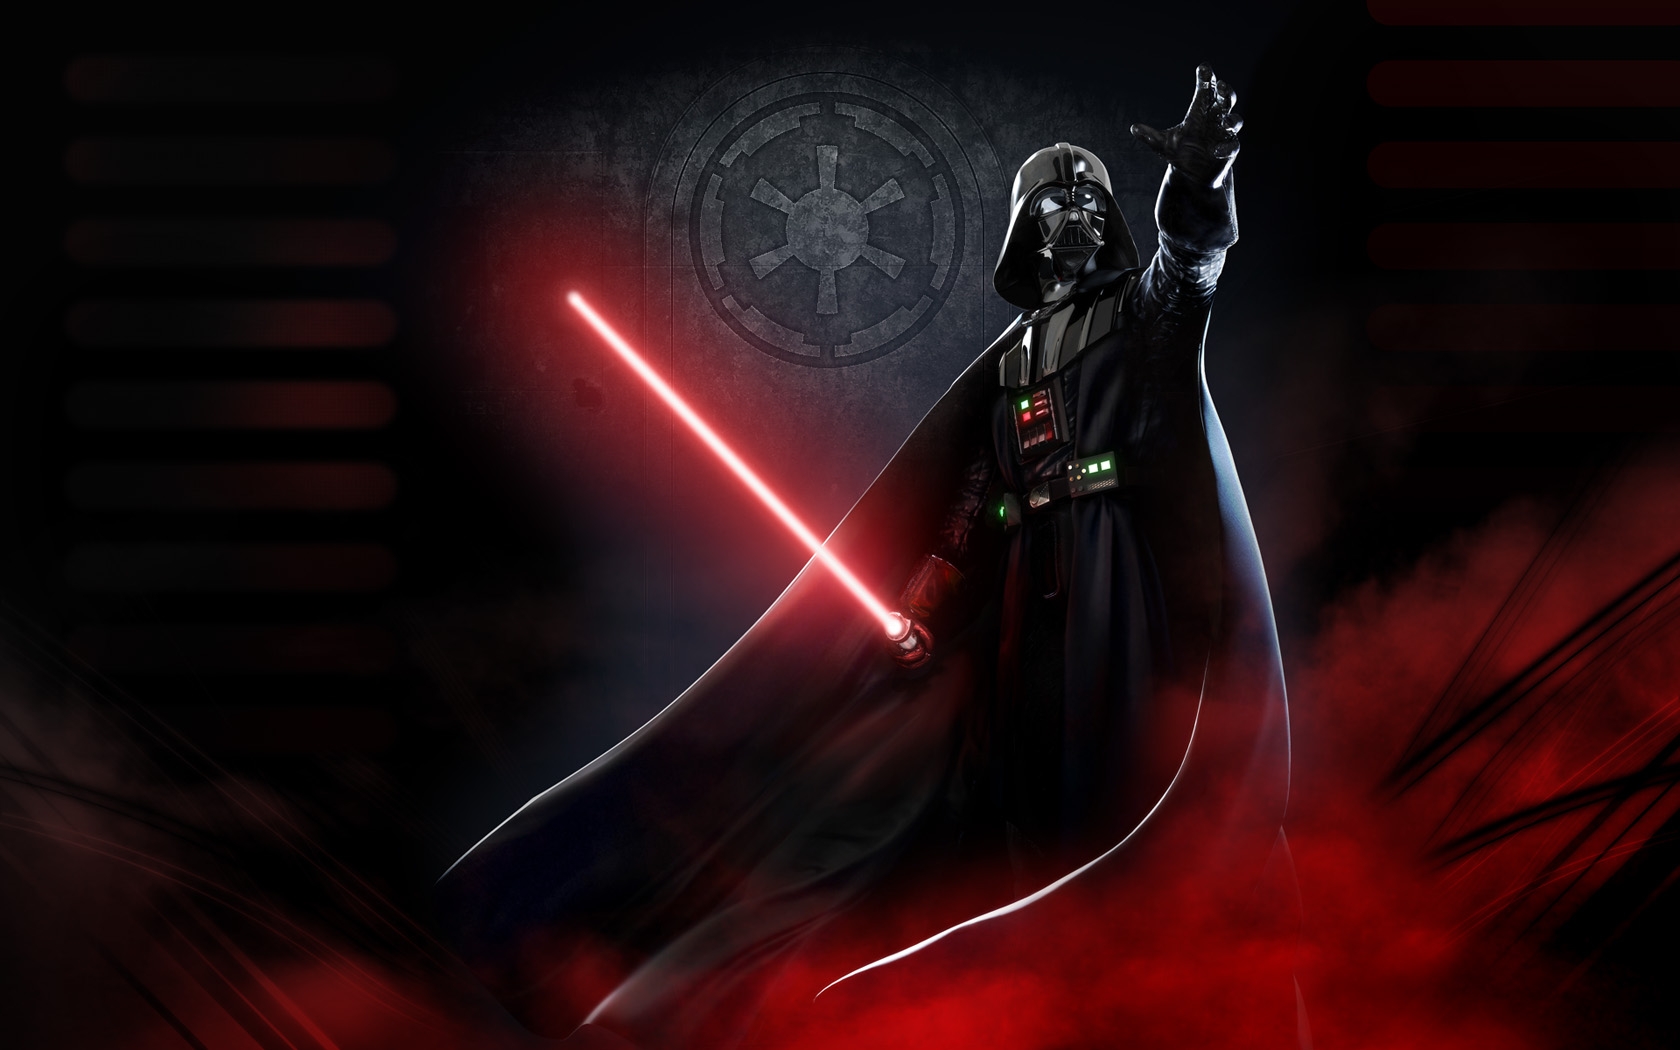 Sci Fi wallpaper featuring Darth Vader from Star Wars.